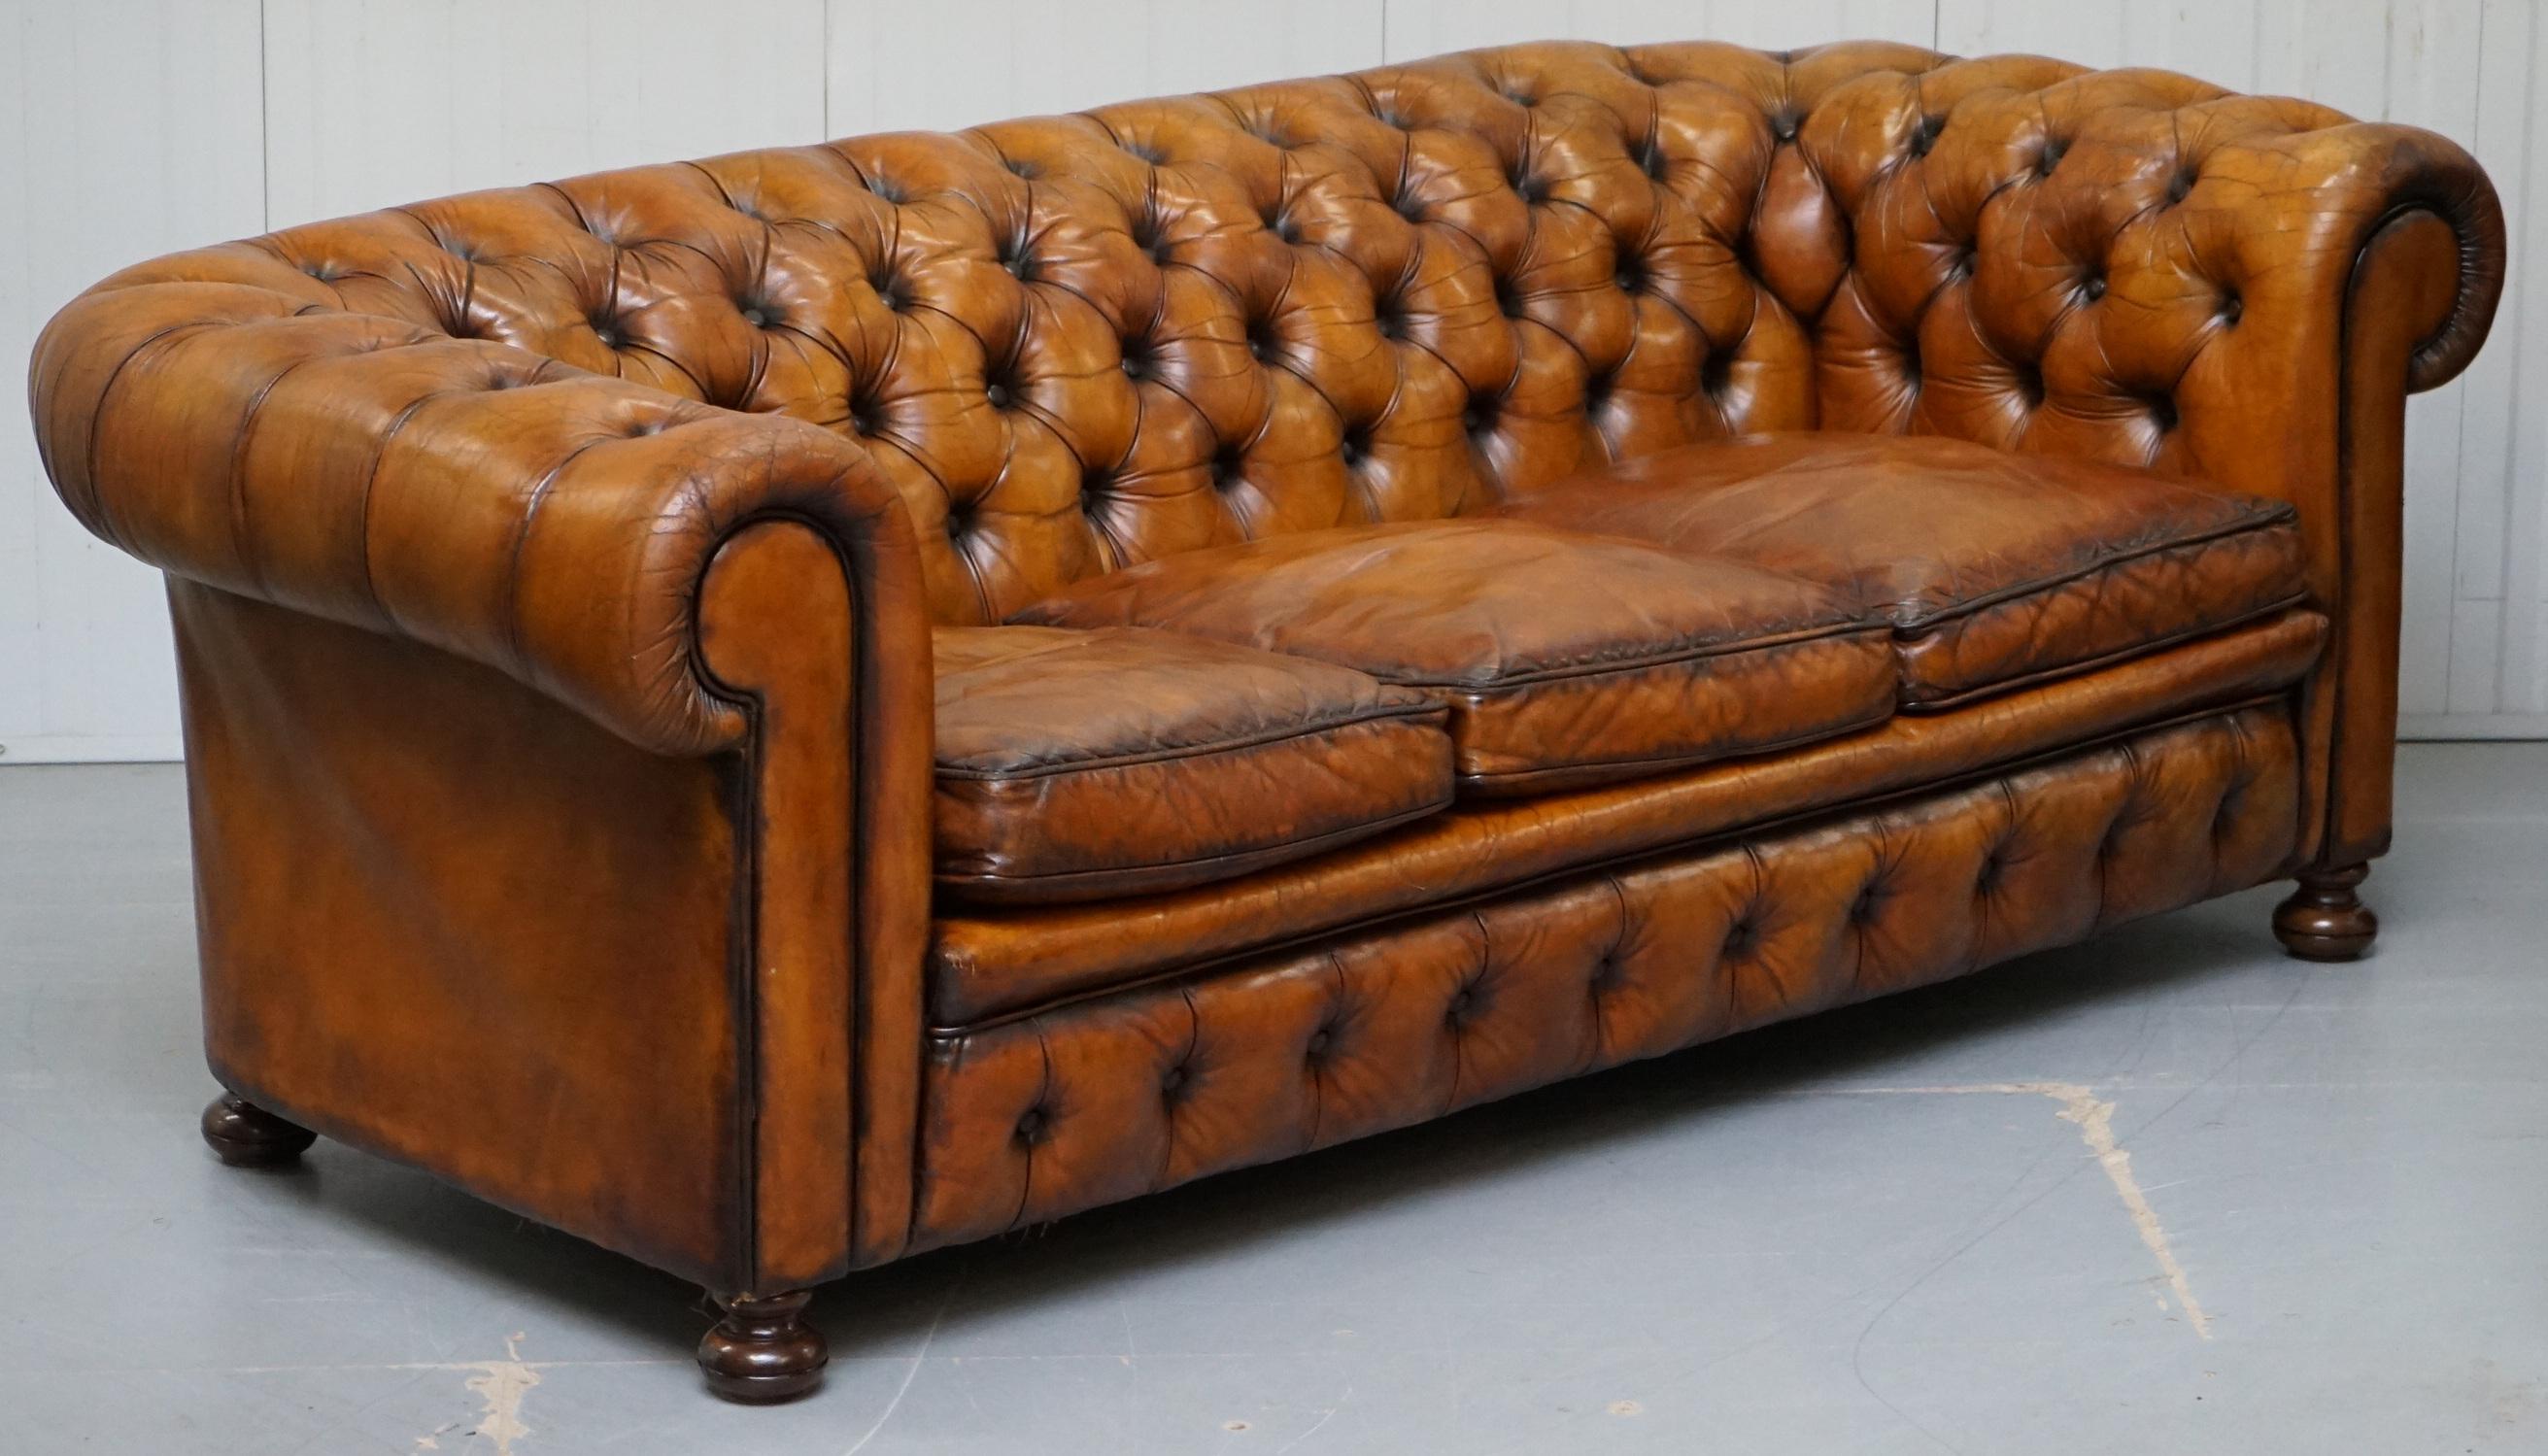 We are delighted to offer for sale this very rare fully restored Vintage hand dyed Whiskey brown leather Chesterfield sofa with original padding, coil sprung all-over and feather filled cushions 

This sofa is a very rare model, its fully sprung